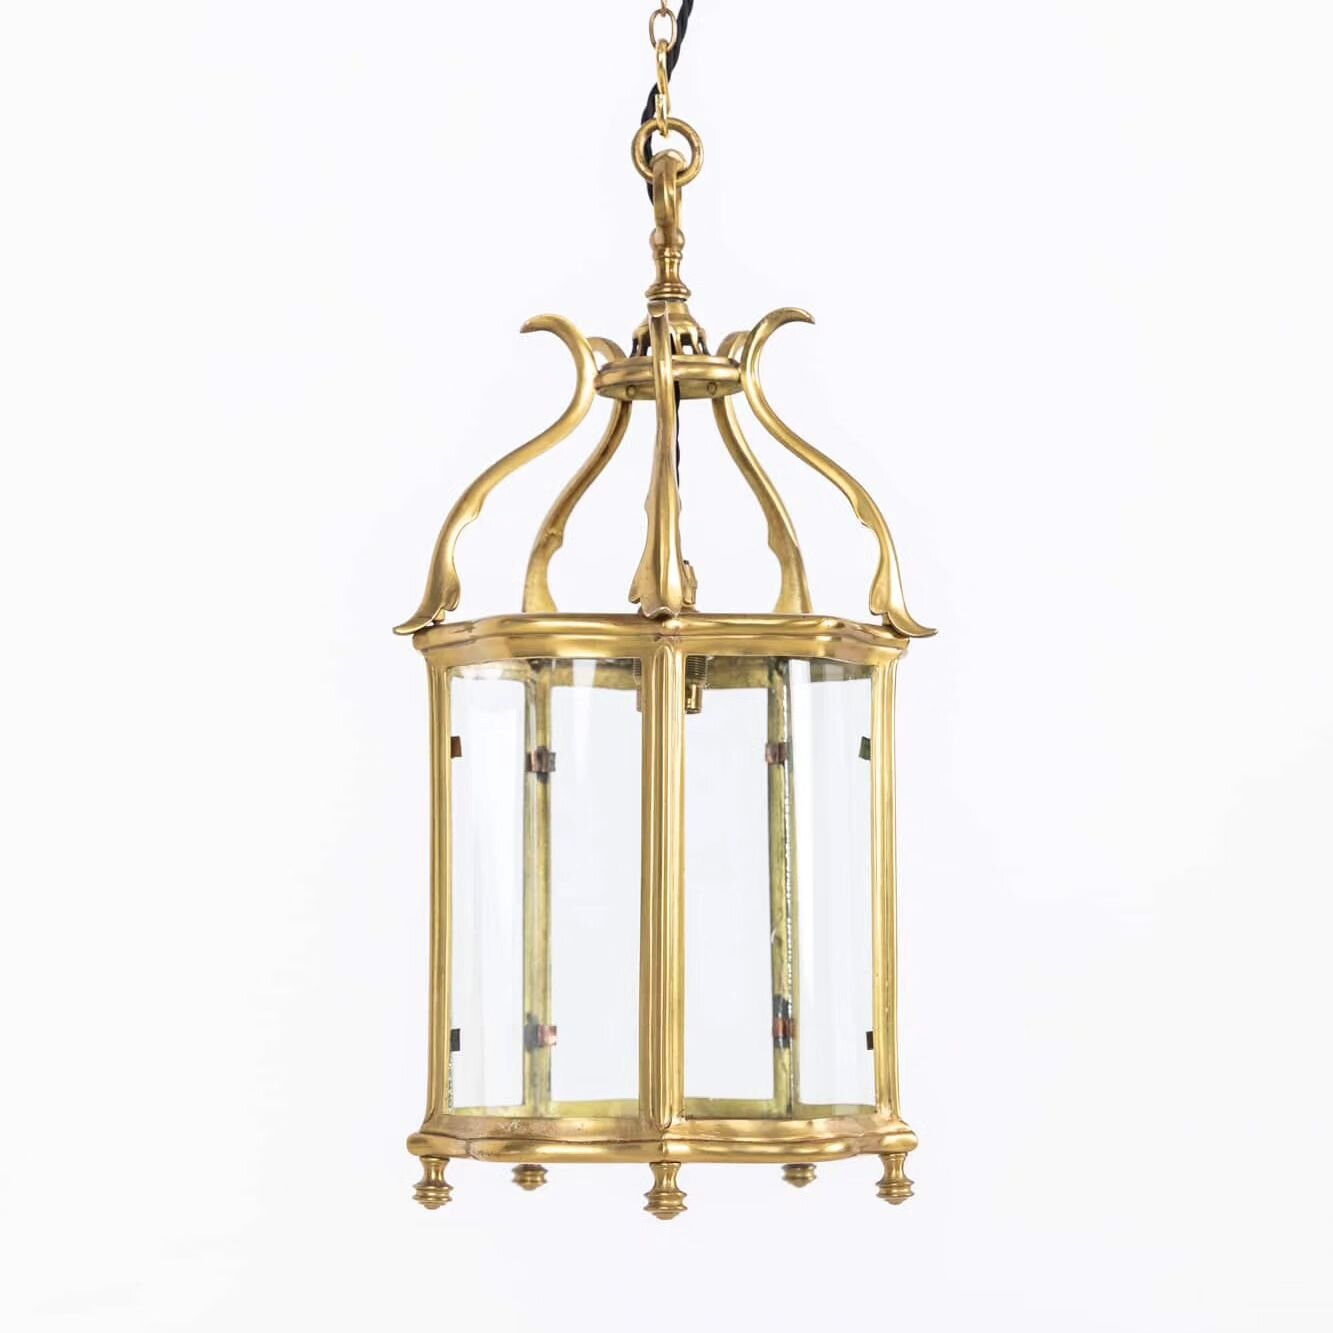 Beautiful porch / hall lantern by Faraday &amp; Son. Polished cast brass frame with original curved glazed panels. 

#antiquesworkshop #vintageindustrial #antique #vintage #midcentury #antiques #midcenturymodern #interiordesign #interiors #forsale #i